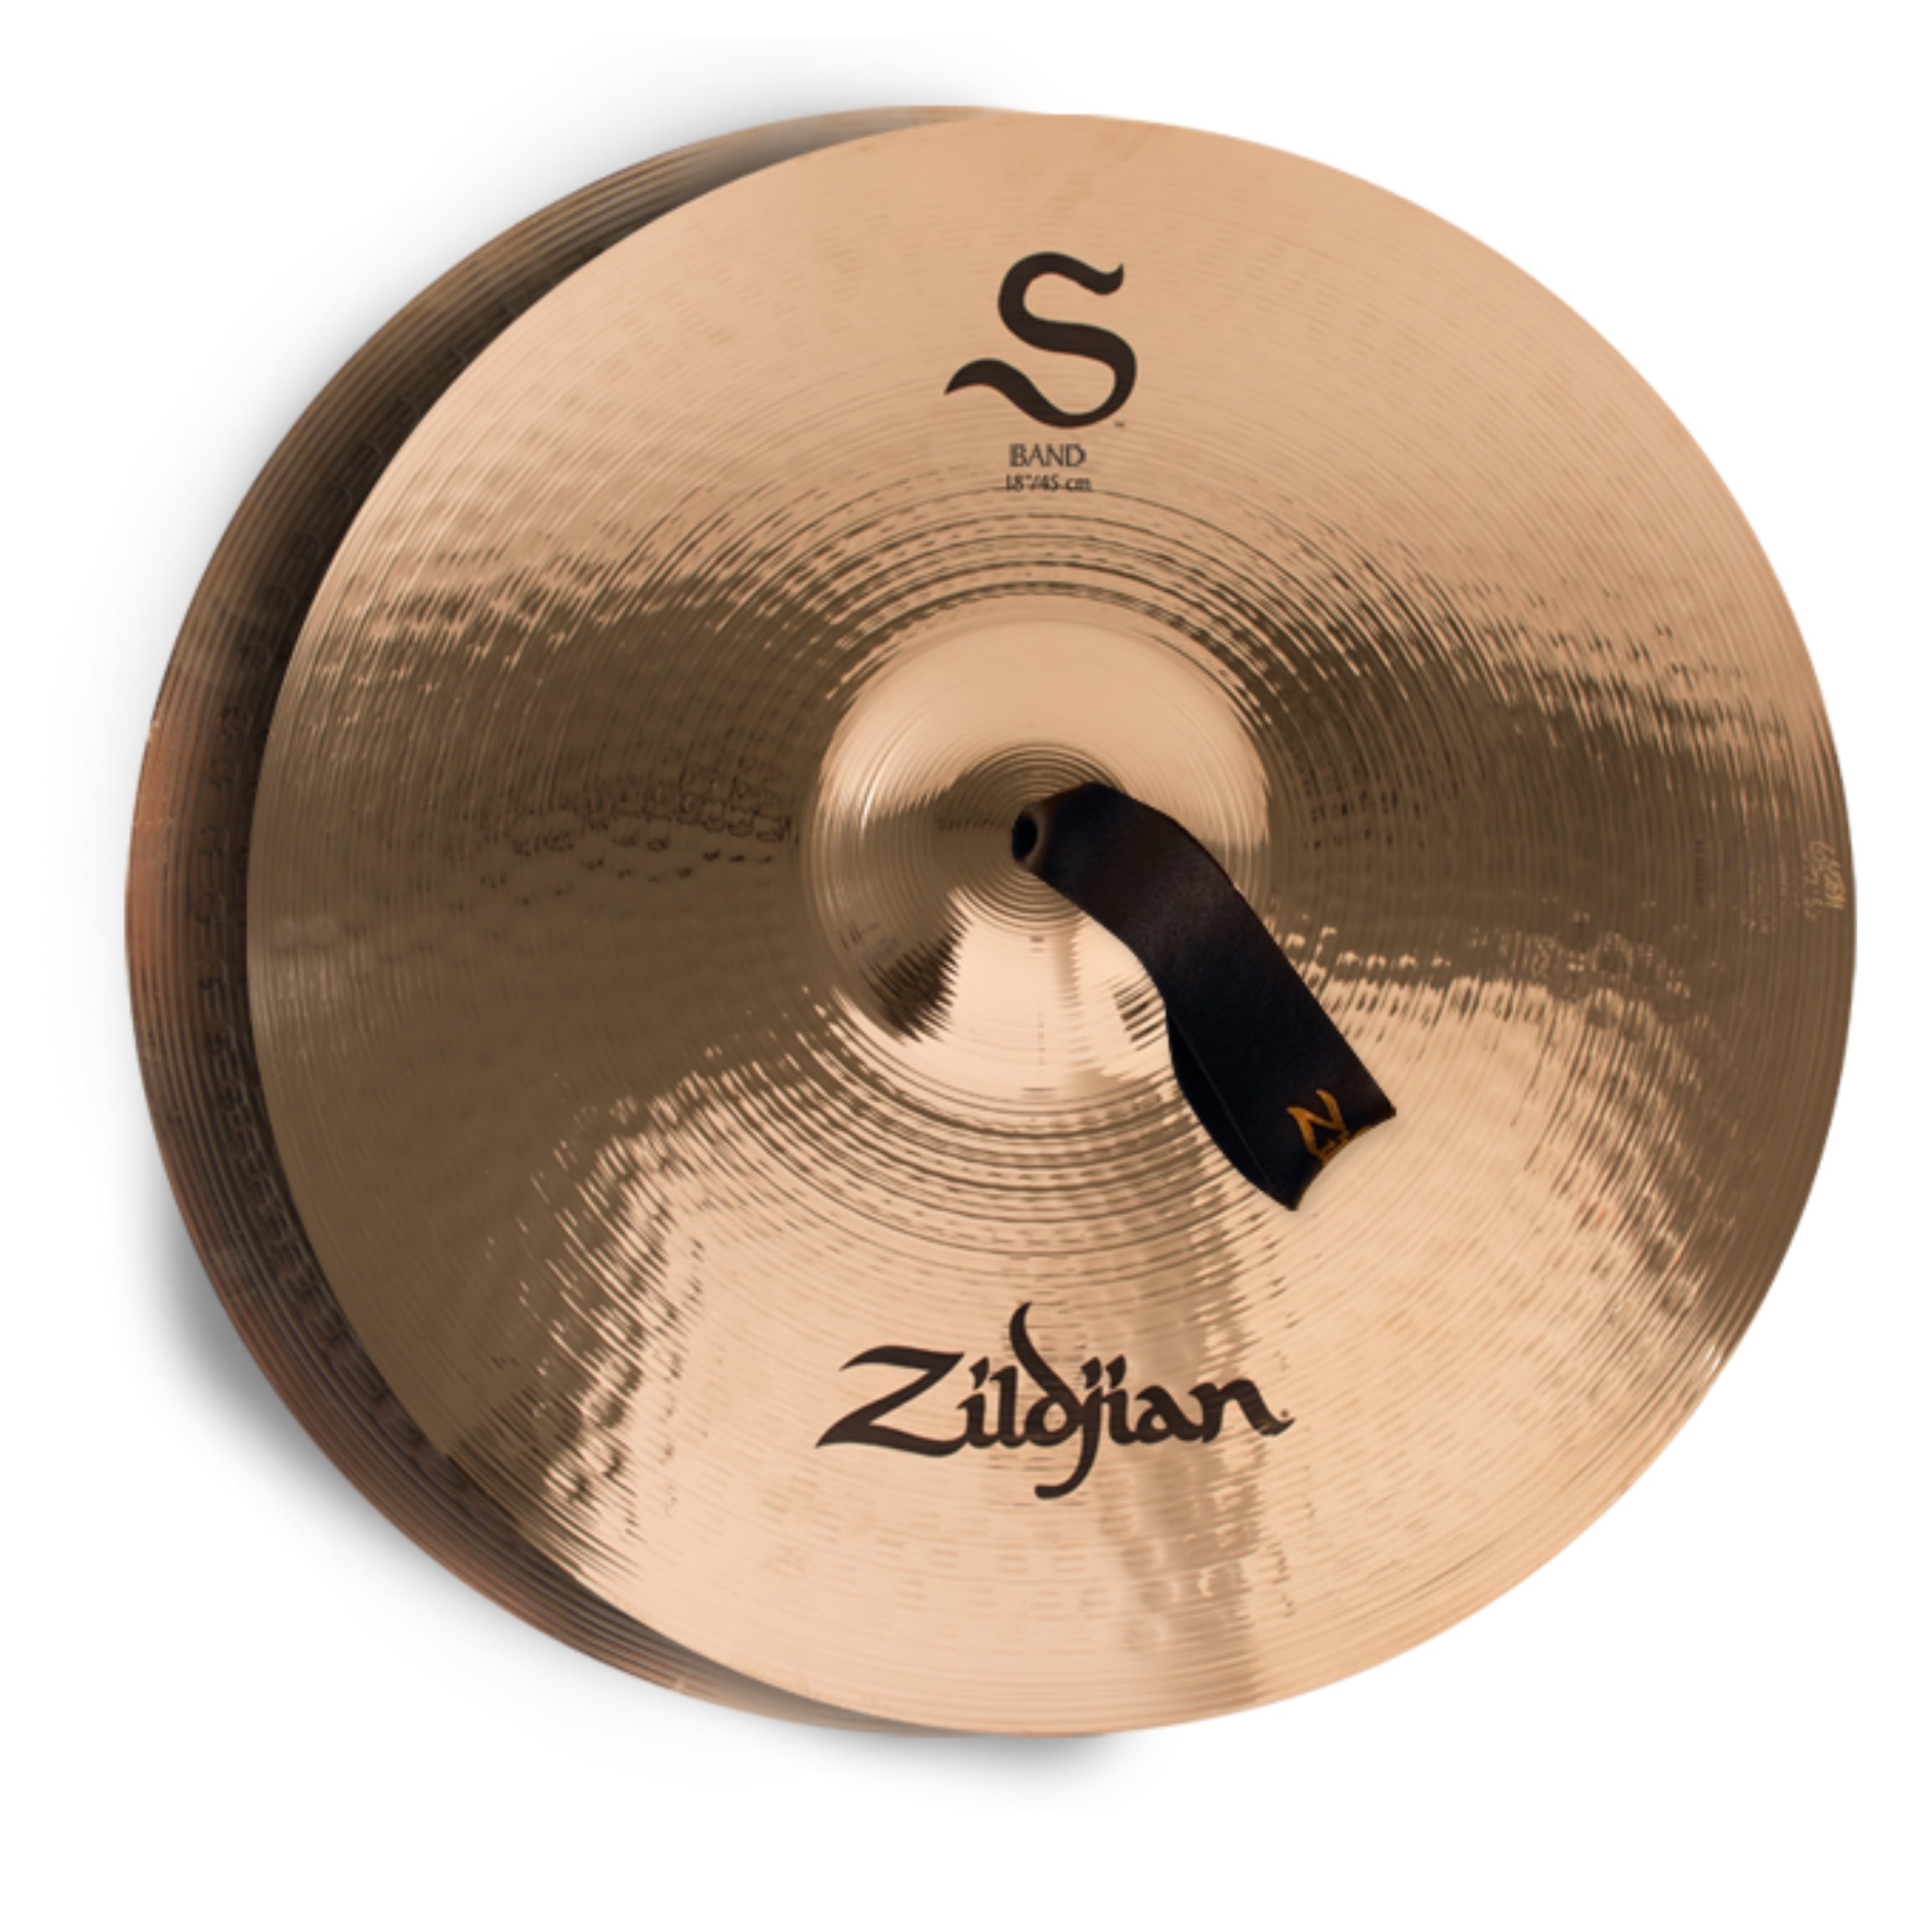 Zildjian 18" S Orchestral Family Band Cymbals